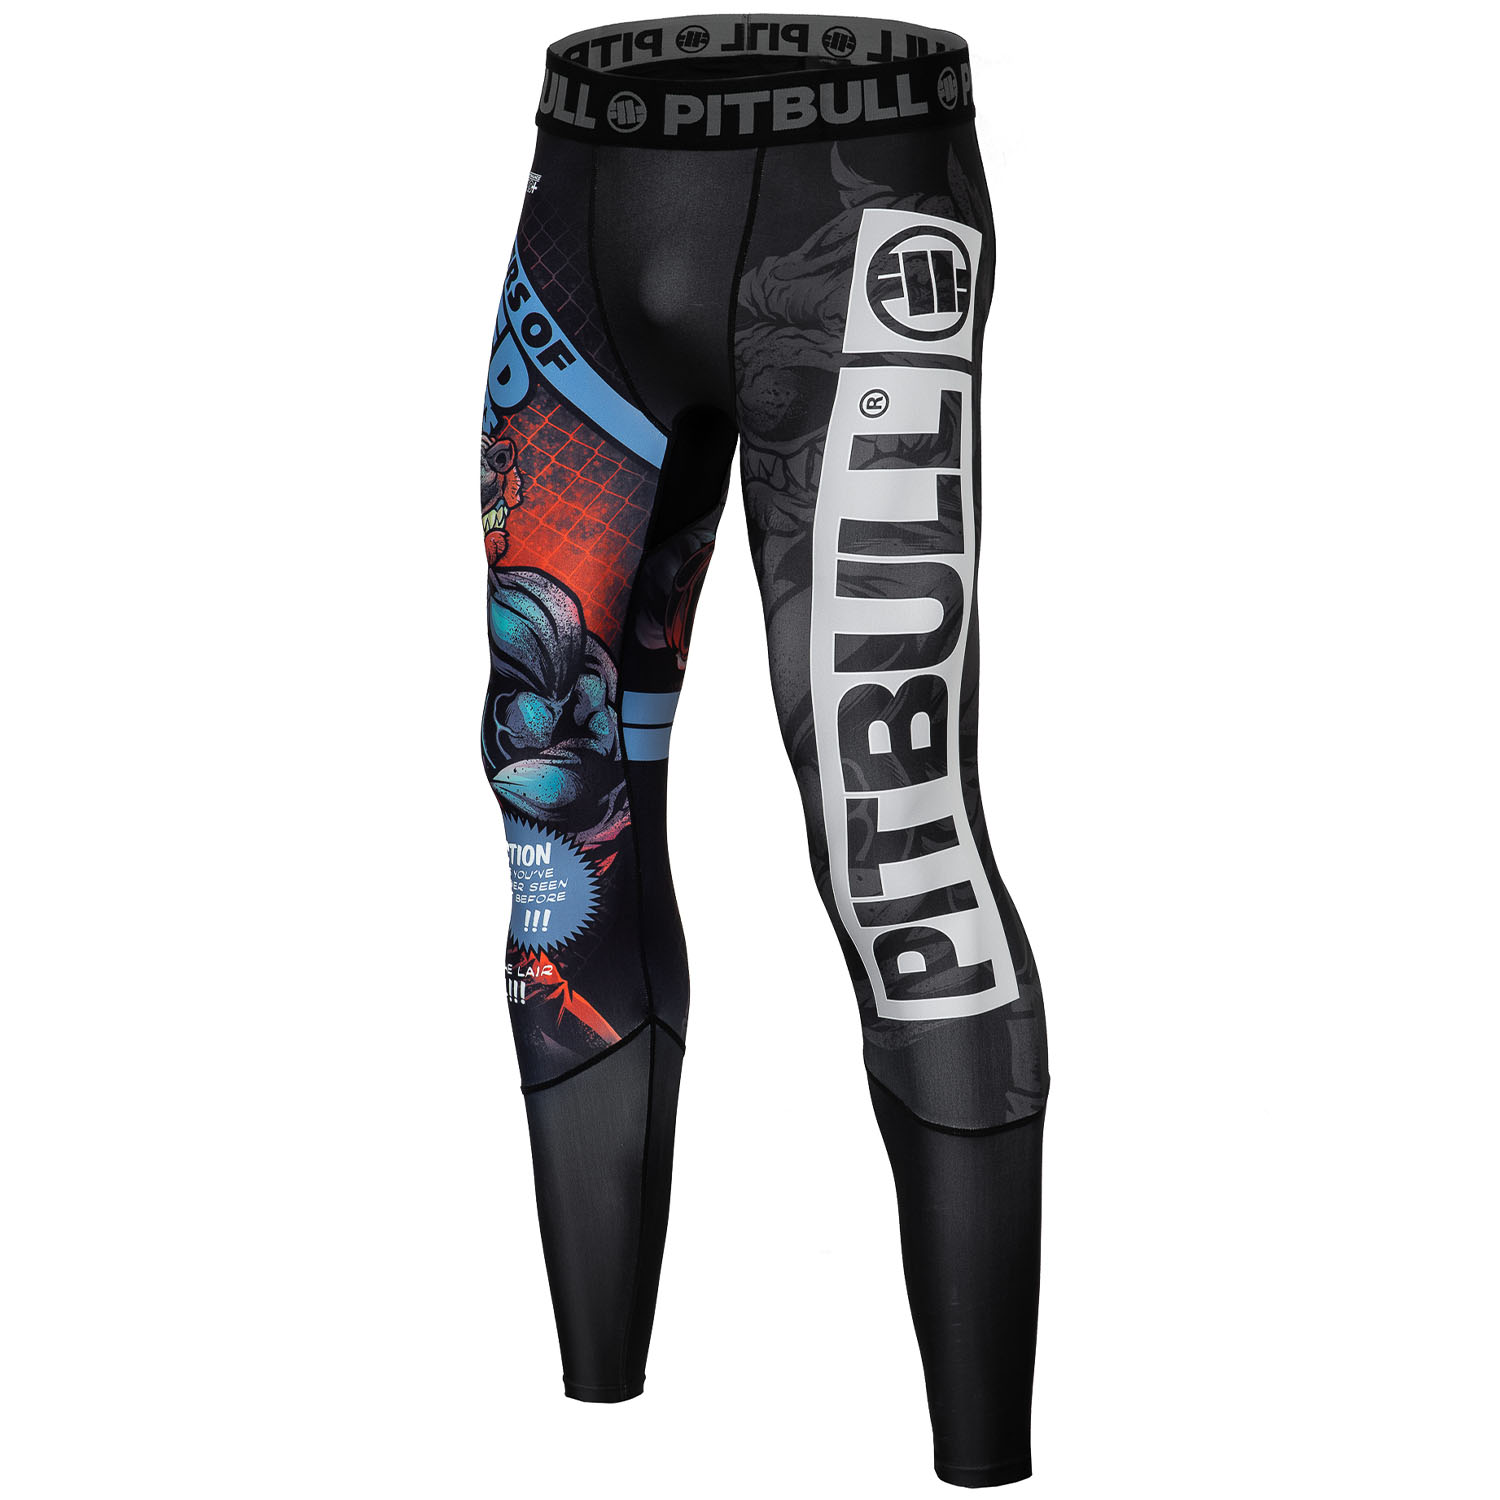 Pit Bull West Coast Compression Pants, Masters Of MMA, schwarz